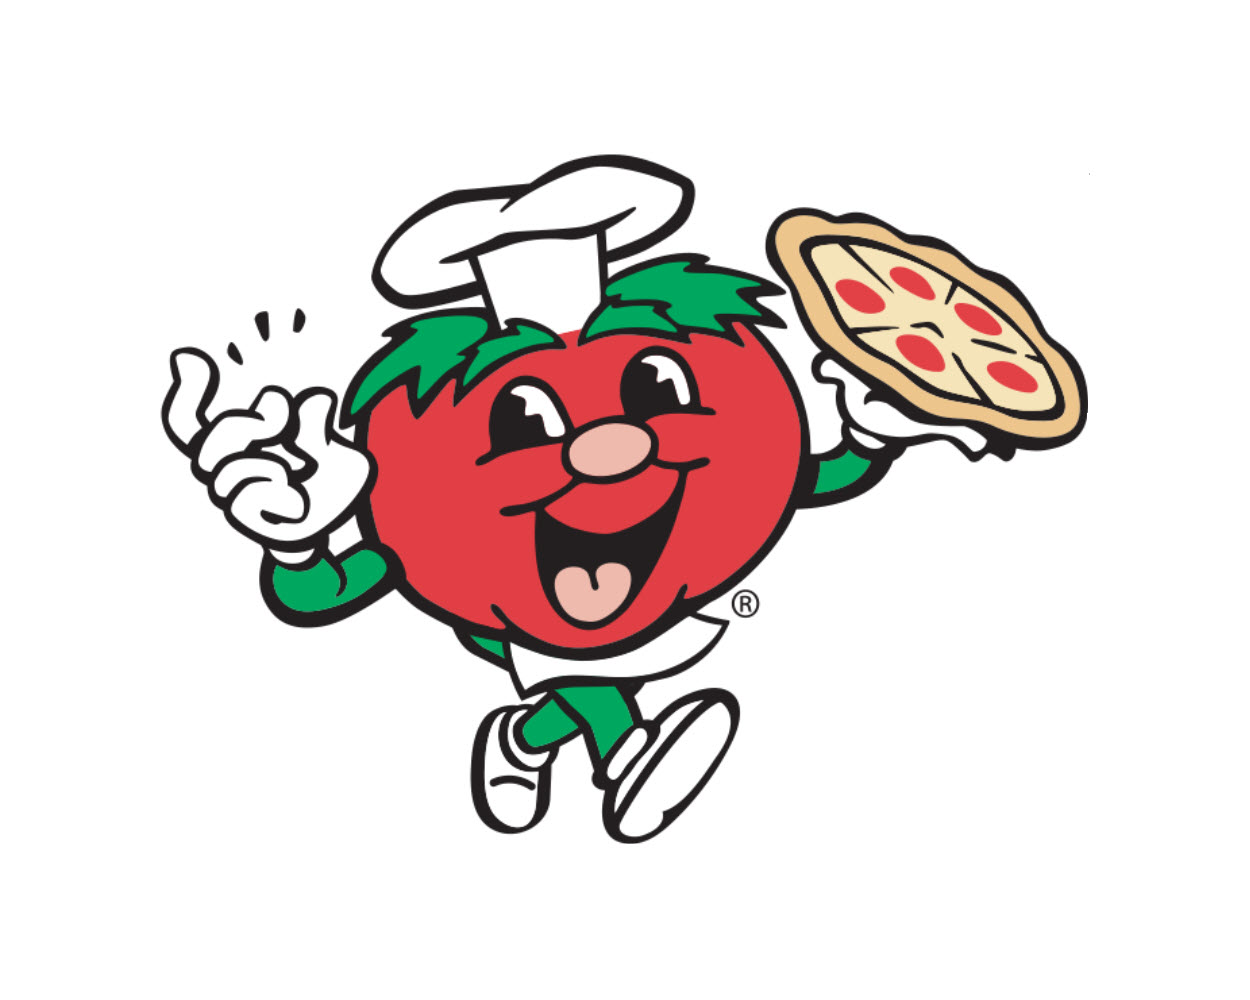 Snappy Tomato Pizza - West Union - (937) 544-5583
Carryout, Pick-Up and Delivery